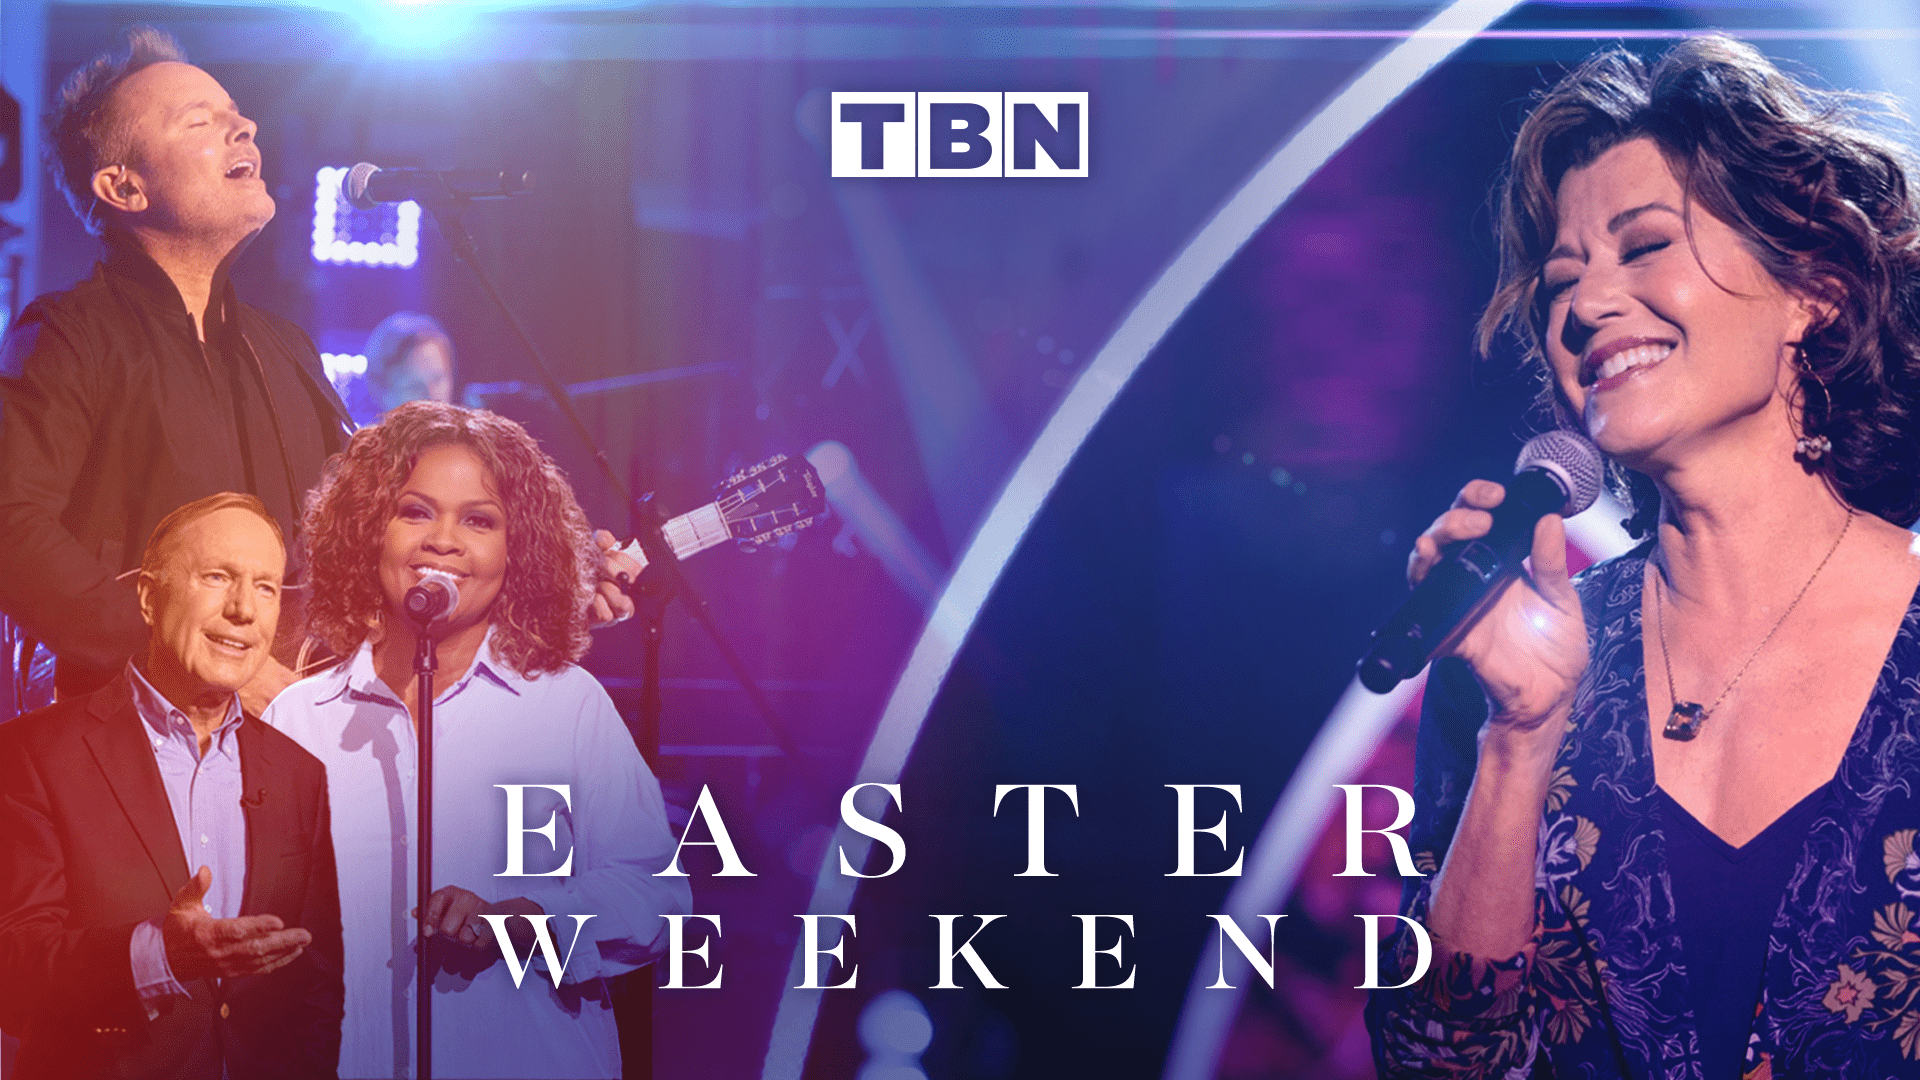 TBN, the world's largest religious broadcaster, announced today a special Easter weekend lineup of fresh programming